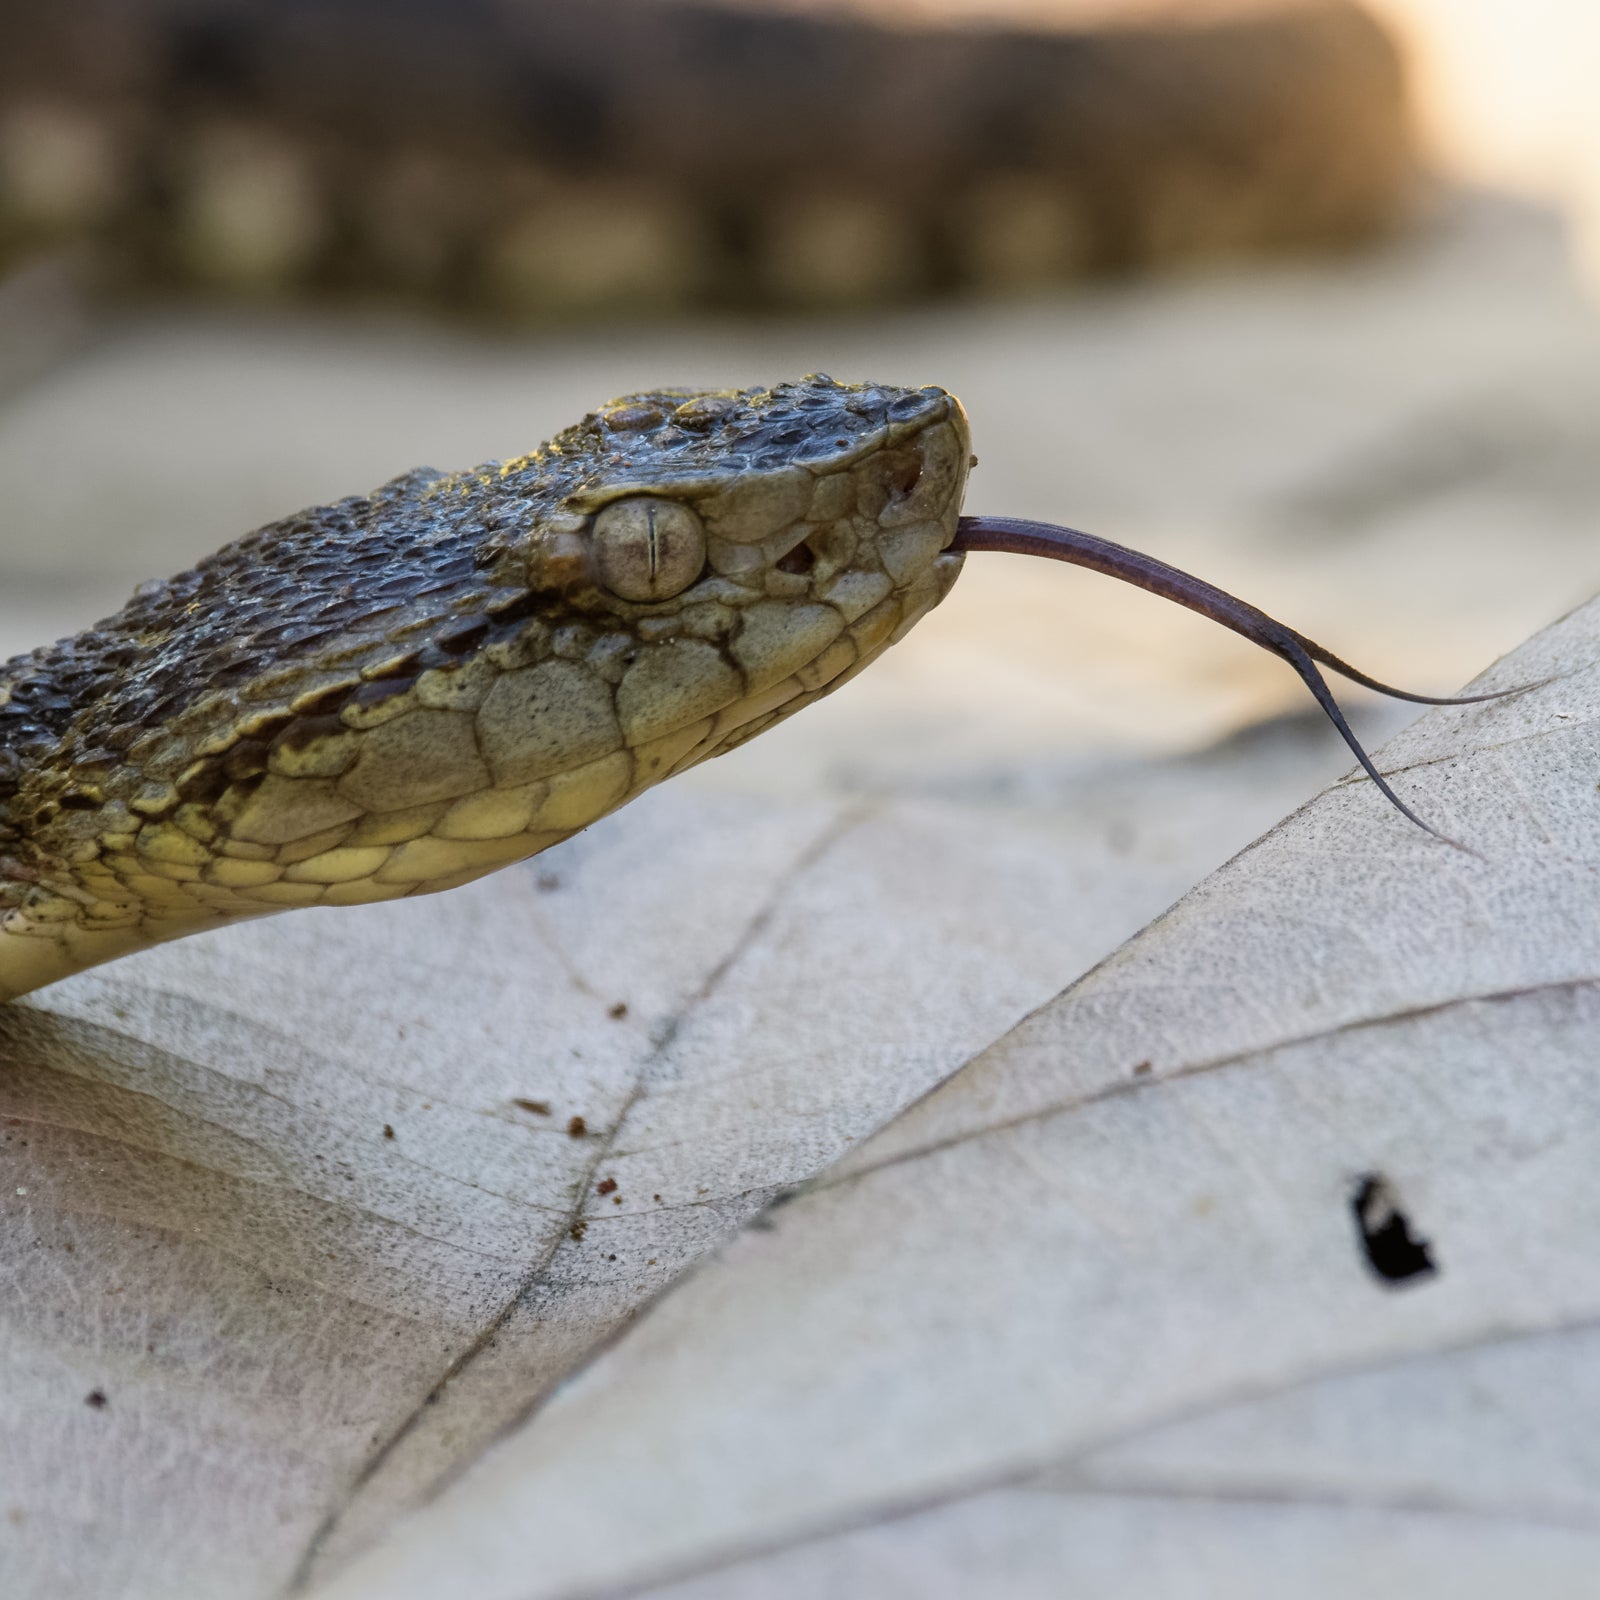 Can snakes die from their own venom?